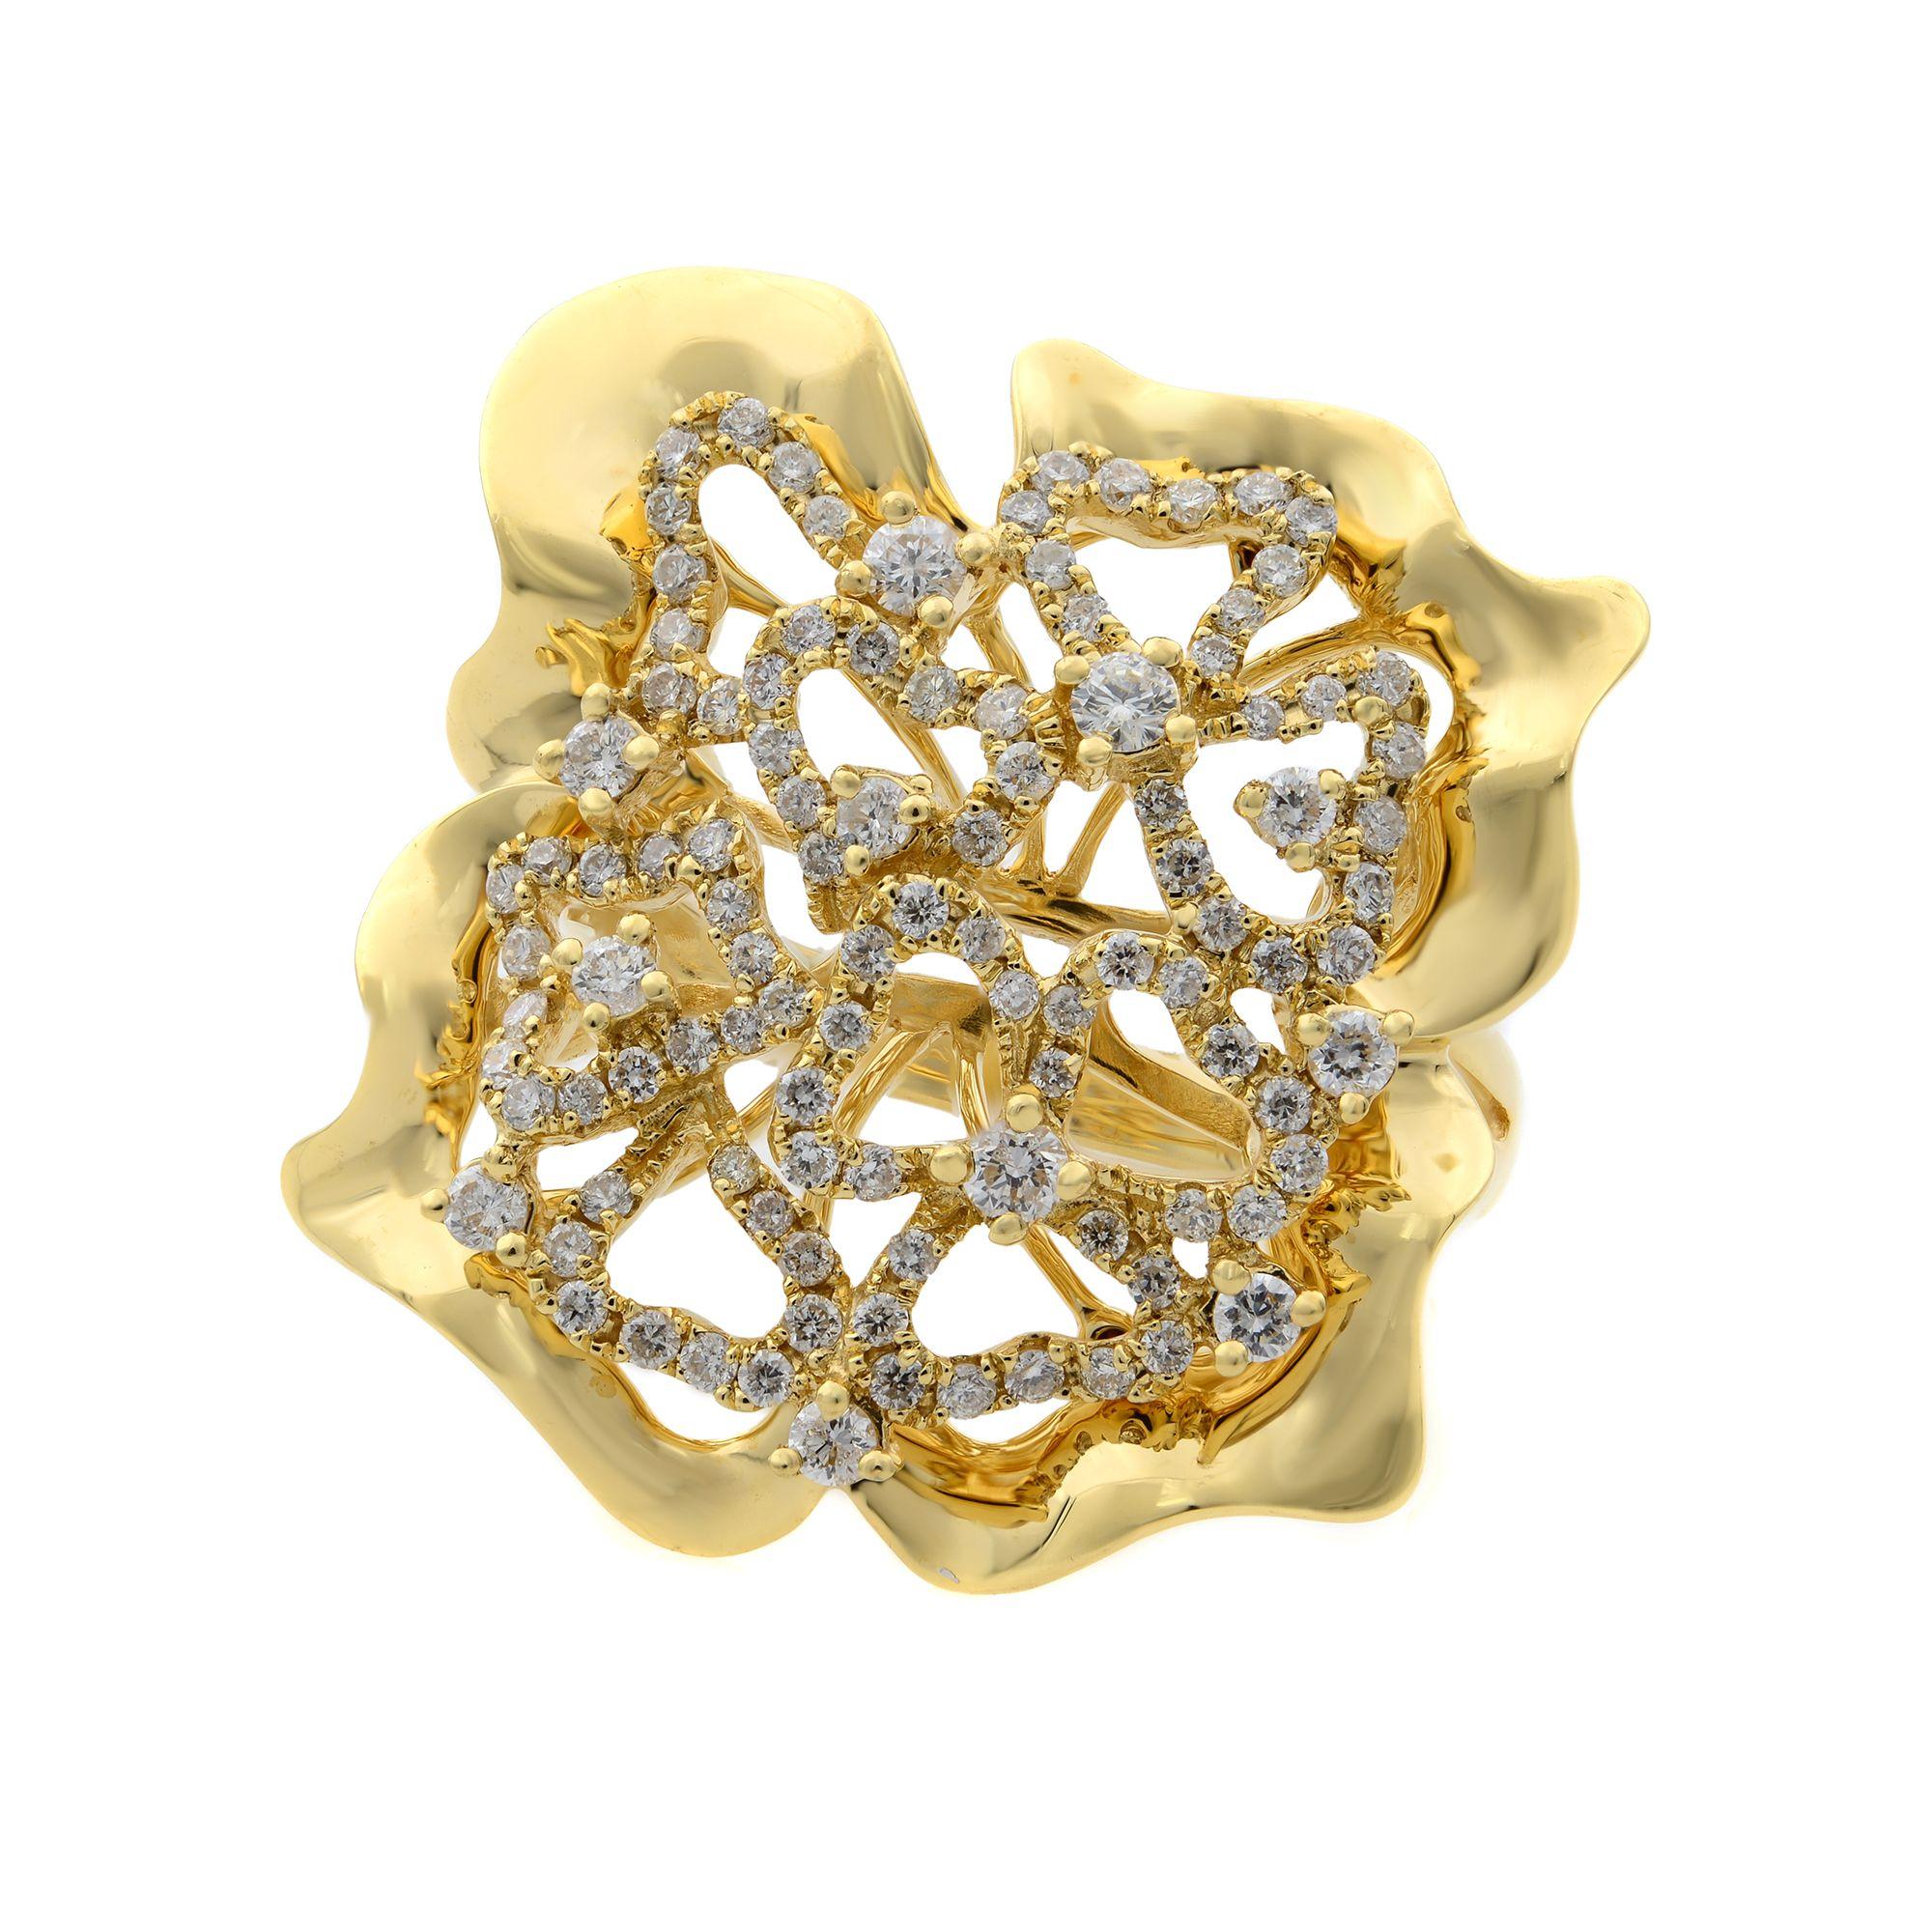 The beautifully unique ring is crafted in 18k yellow gold and showcases an intricate floral design adorned with pave and prong set round cut natural diamonds. Total carat weight is aprox. 0.75. Top measurements 1 inch. Ring size 6.75. Comes in our